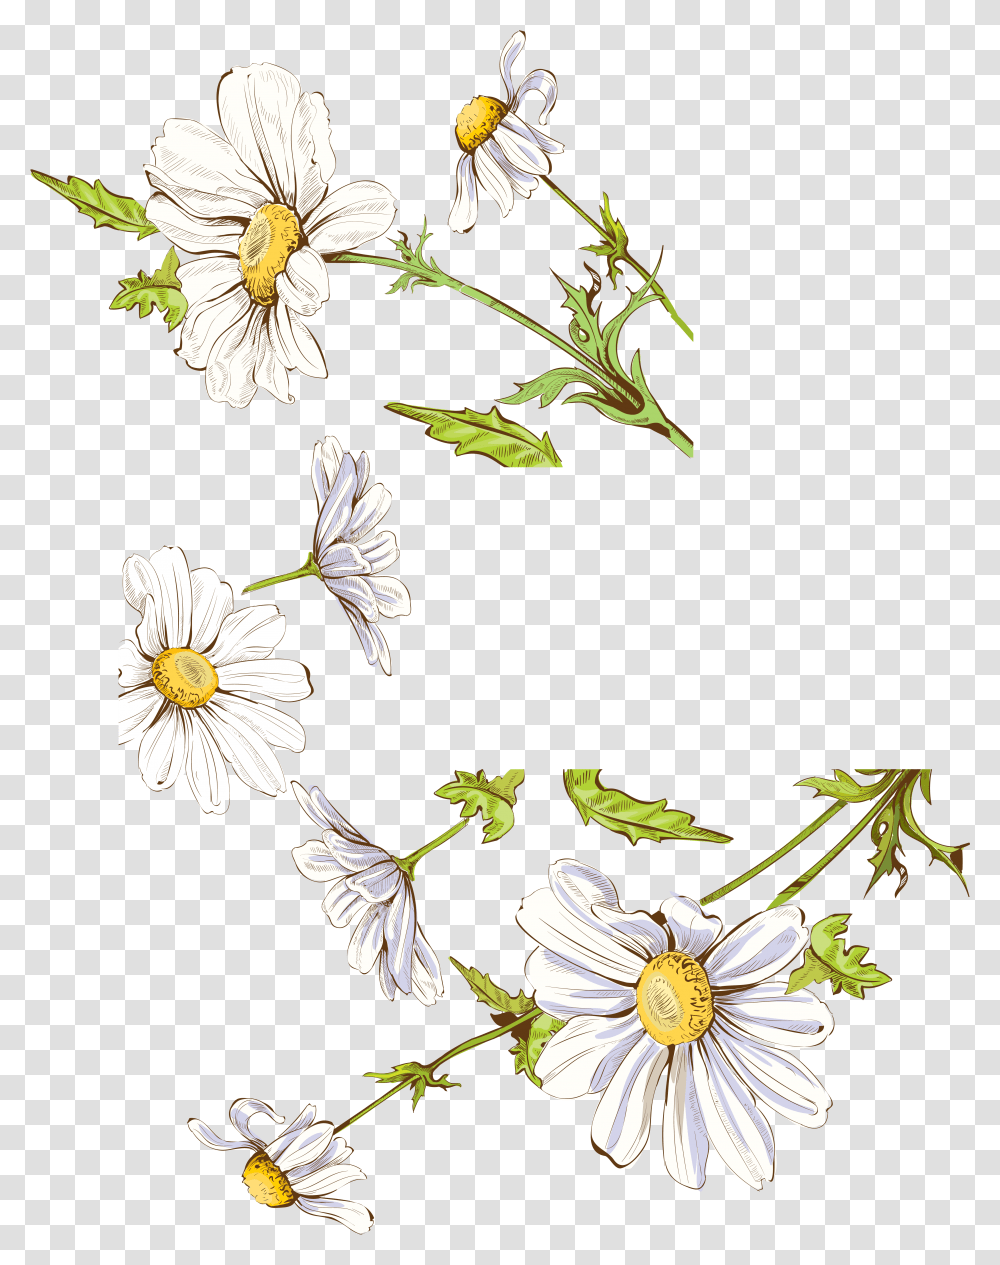 Drawing Illustration Fresh Painted Floral Decoration Illustration, Floral Design, Pattern Transparent Png